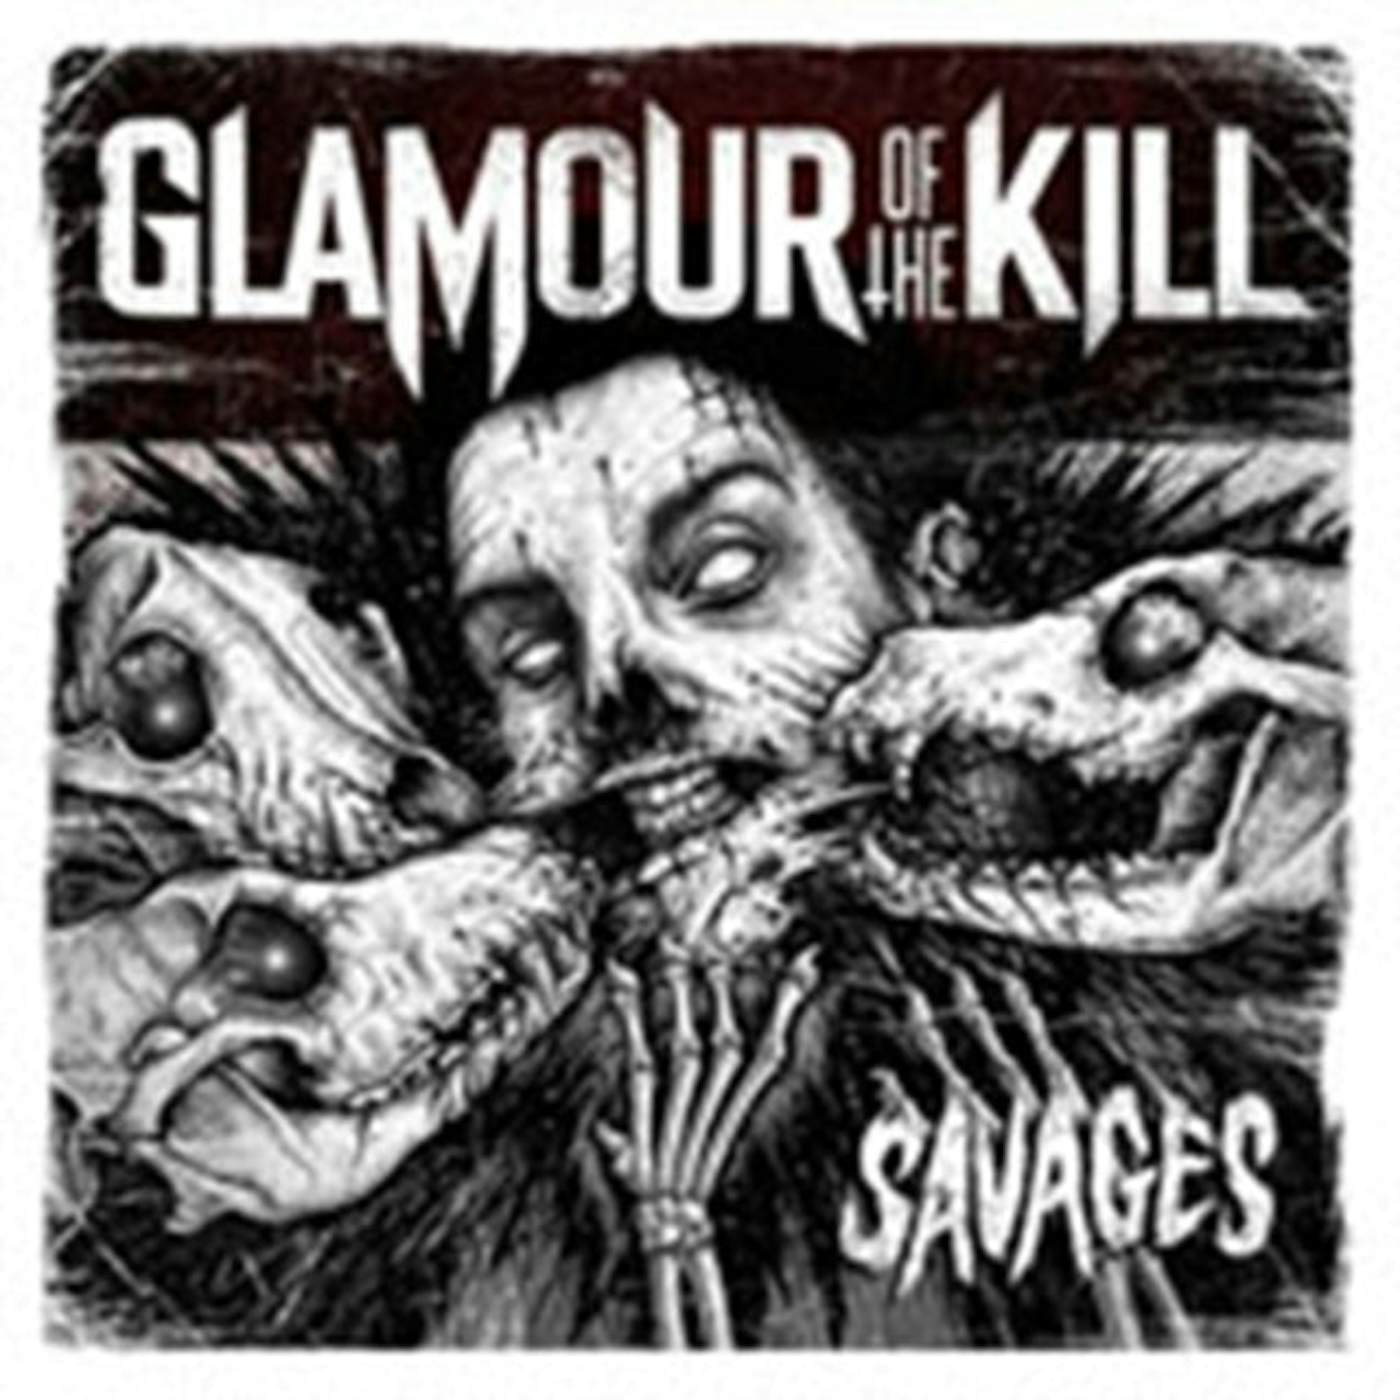 Glamour Of The Kill CD - Savages